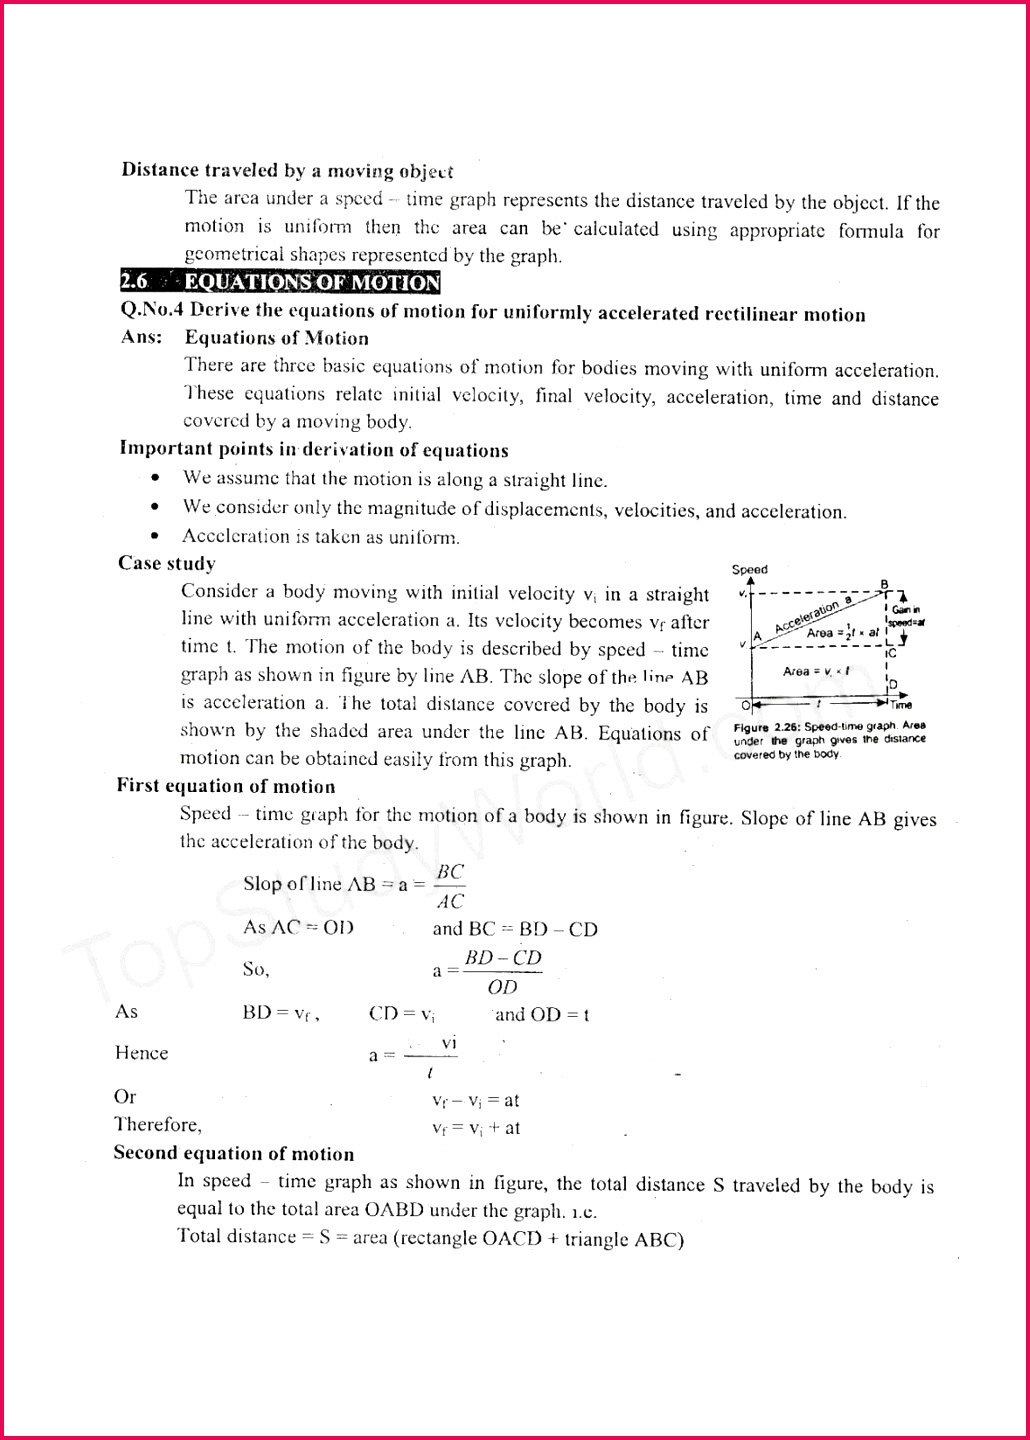 KIPS TEXTBOOK EXCERCISE OF KINEMATICS FOR 9TH CLASS PHYSICS